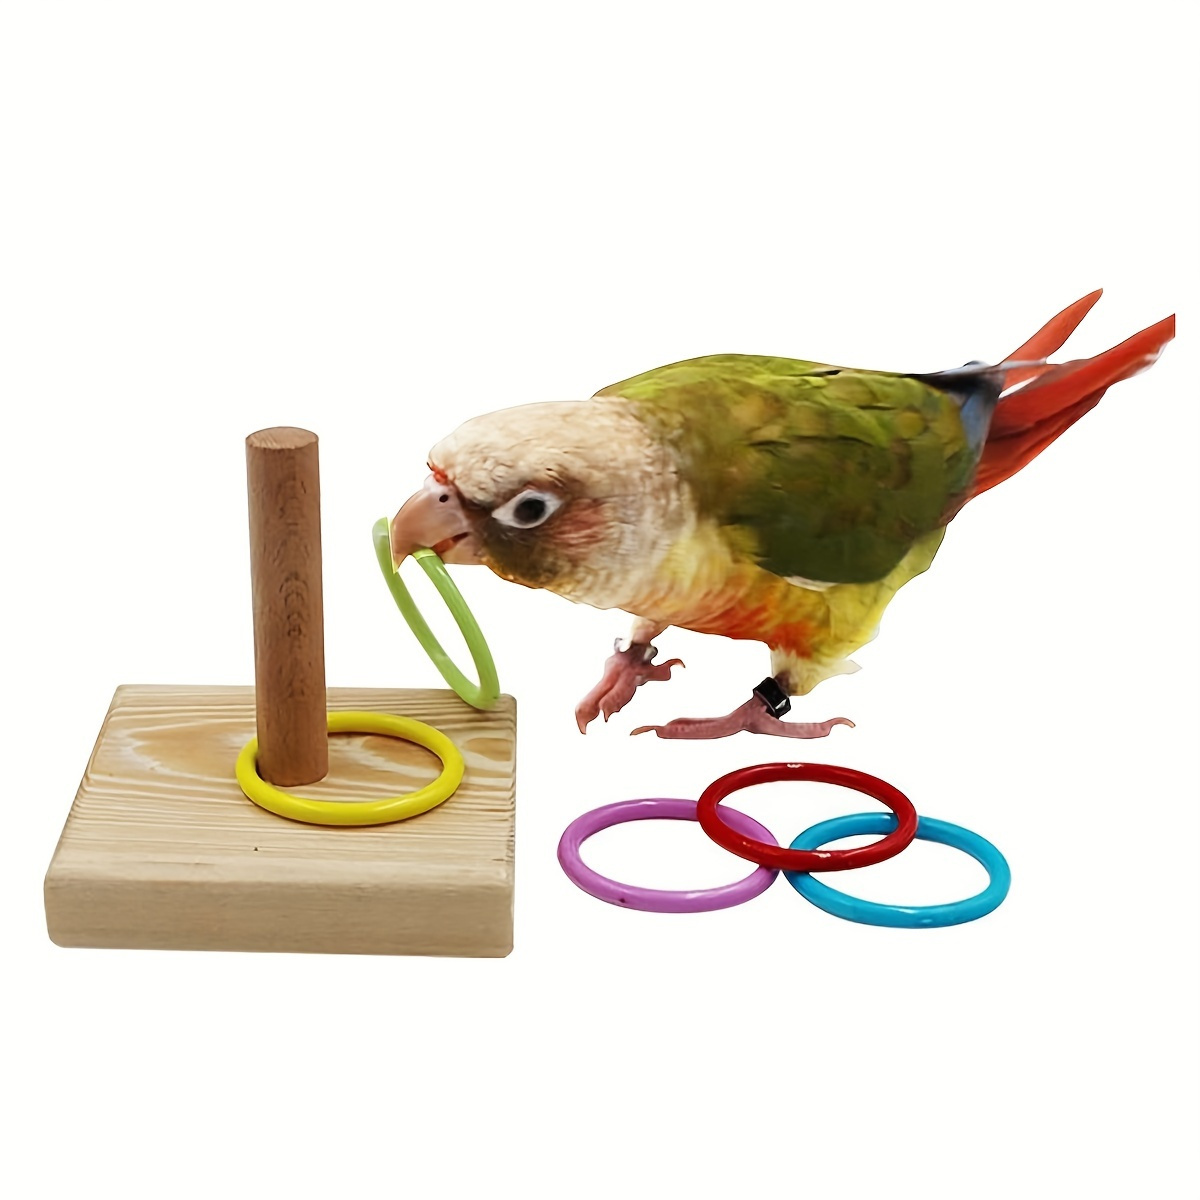 

1 Set Of Wooden Parrot Play Platform With 5pcs Assorted Color Rings Toy, Bird Chewing Toy, Intelligence Parrot Toys, Bird Cage Accessories